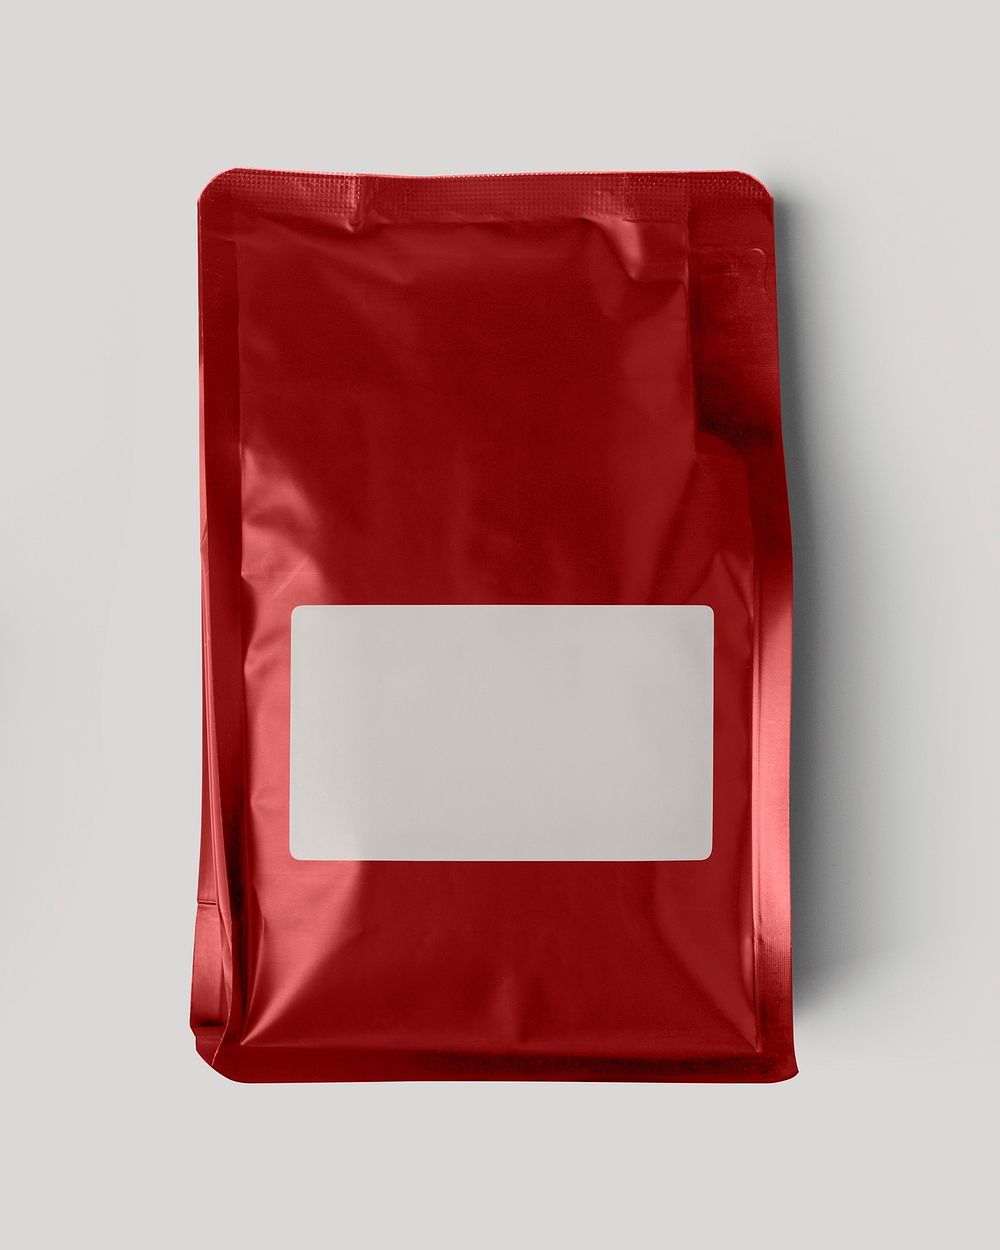 Red coffee bag, blank label, product packaging, flat lay design